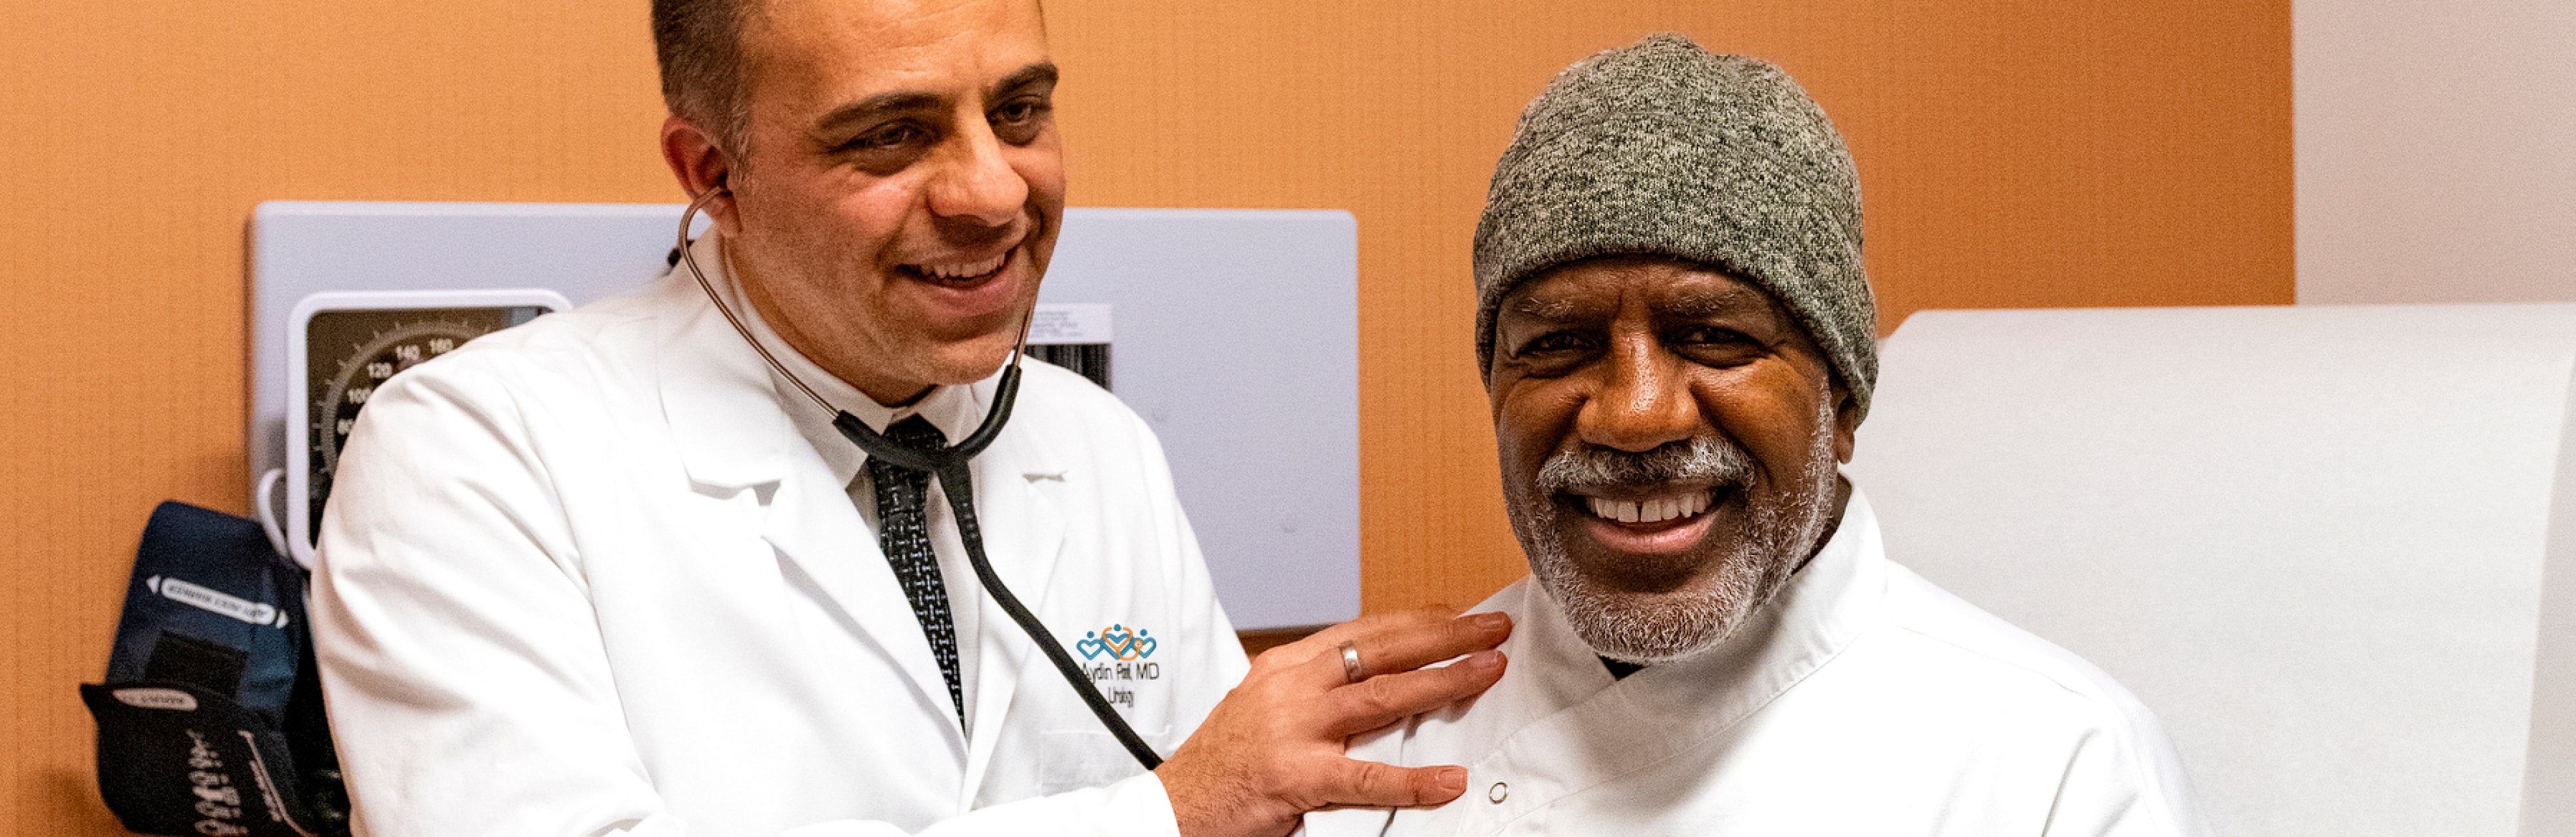 Male physician with a male, African American patient